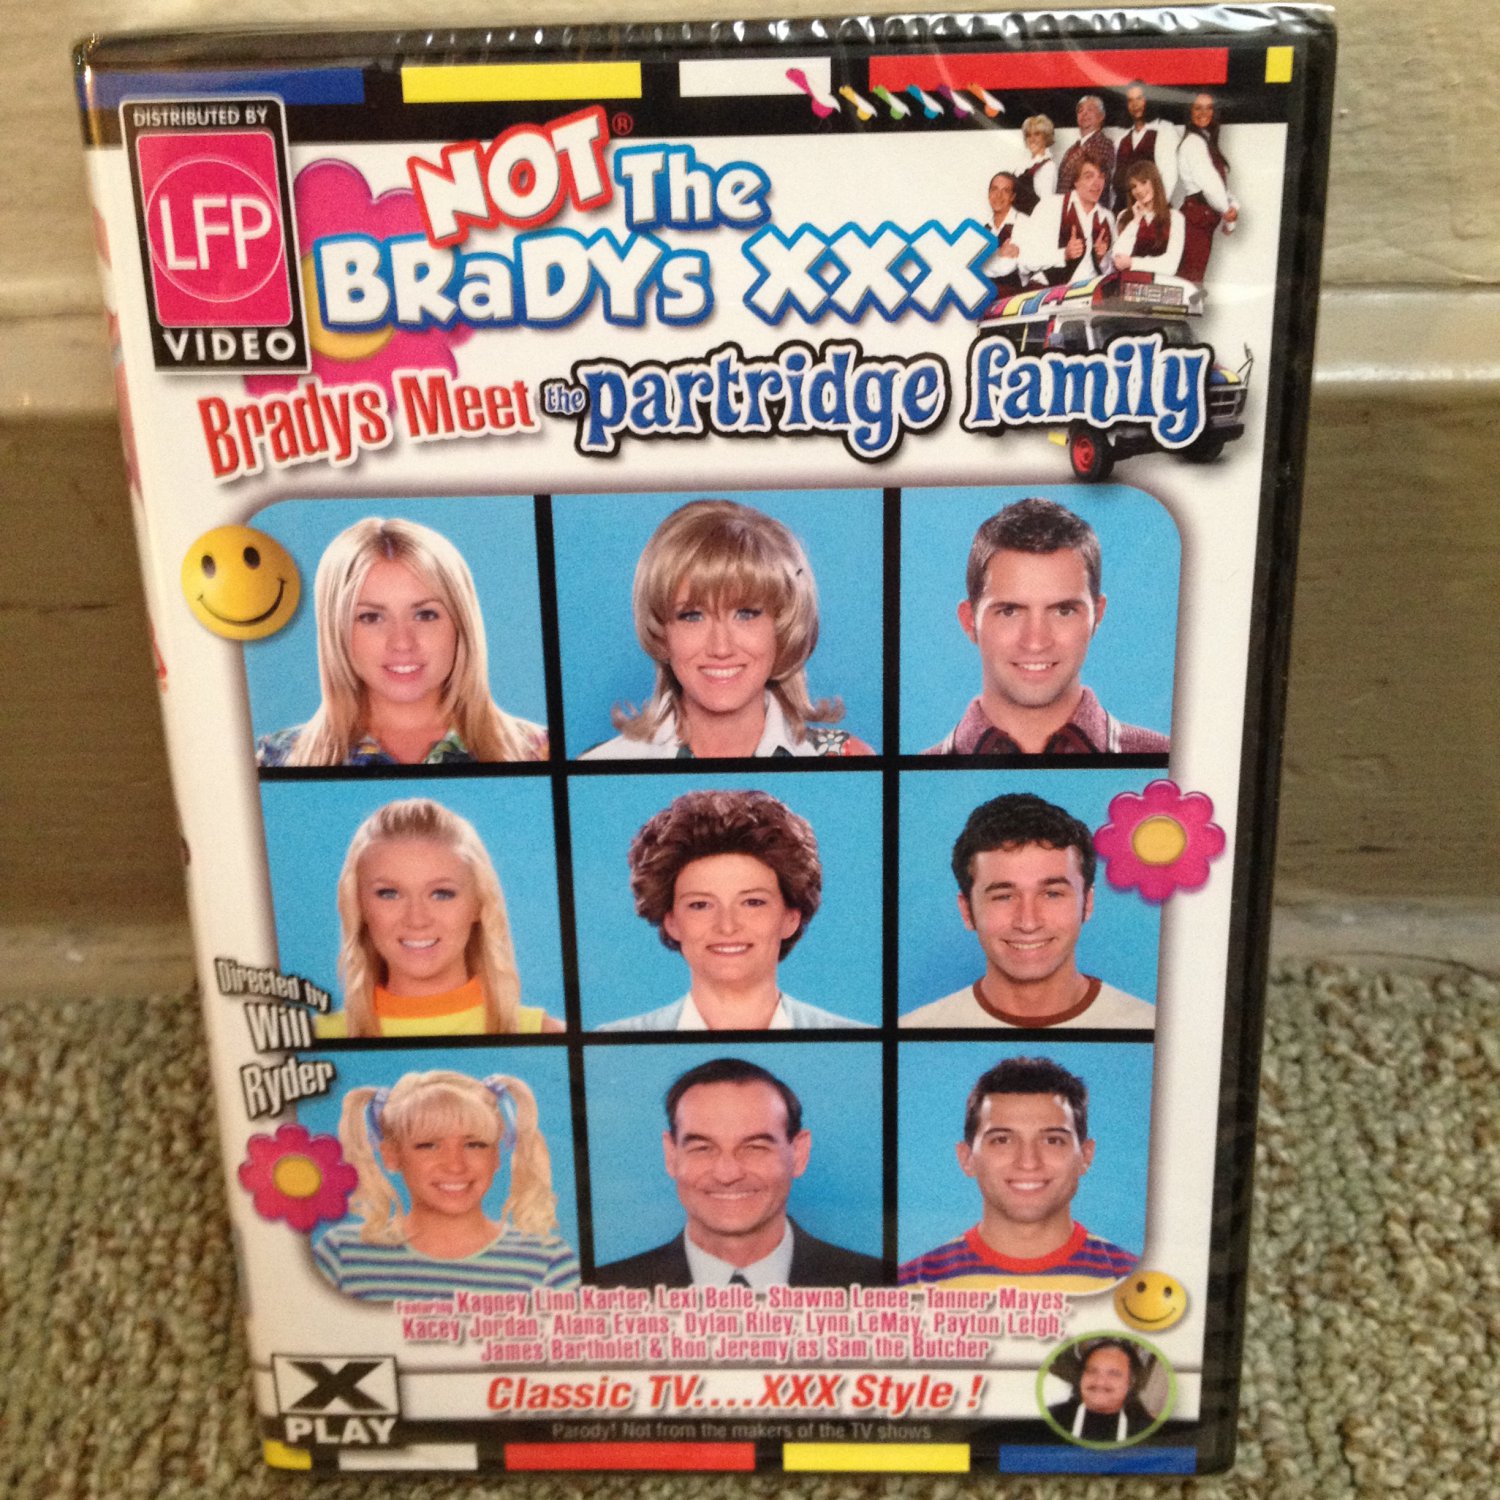 NOT THE BRADYS  XXX BRADYS MEET THE PARTRIDGE FAMILY ADULT DVD NEW NEVER OPENED SHRINK WRAPPED